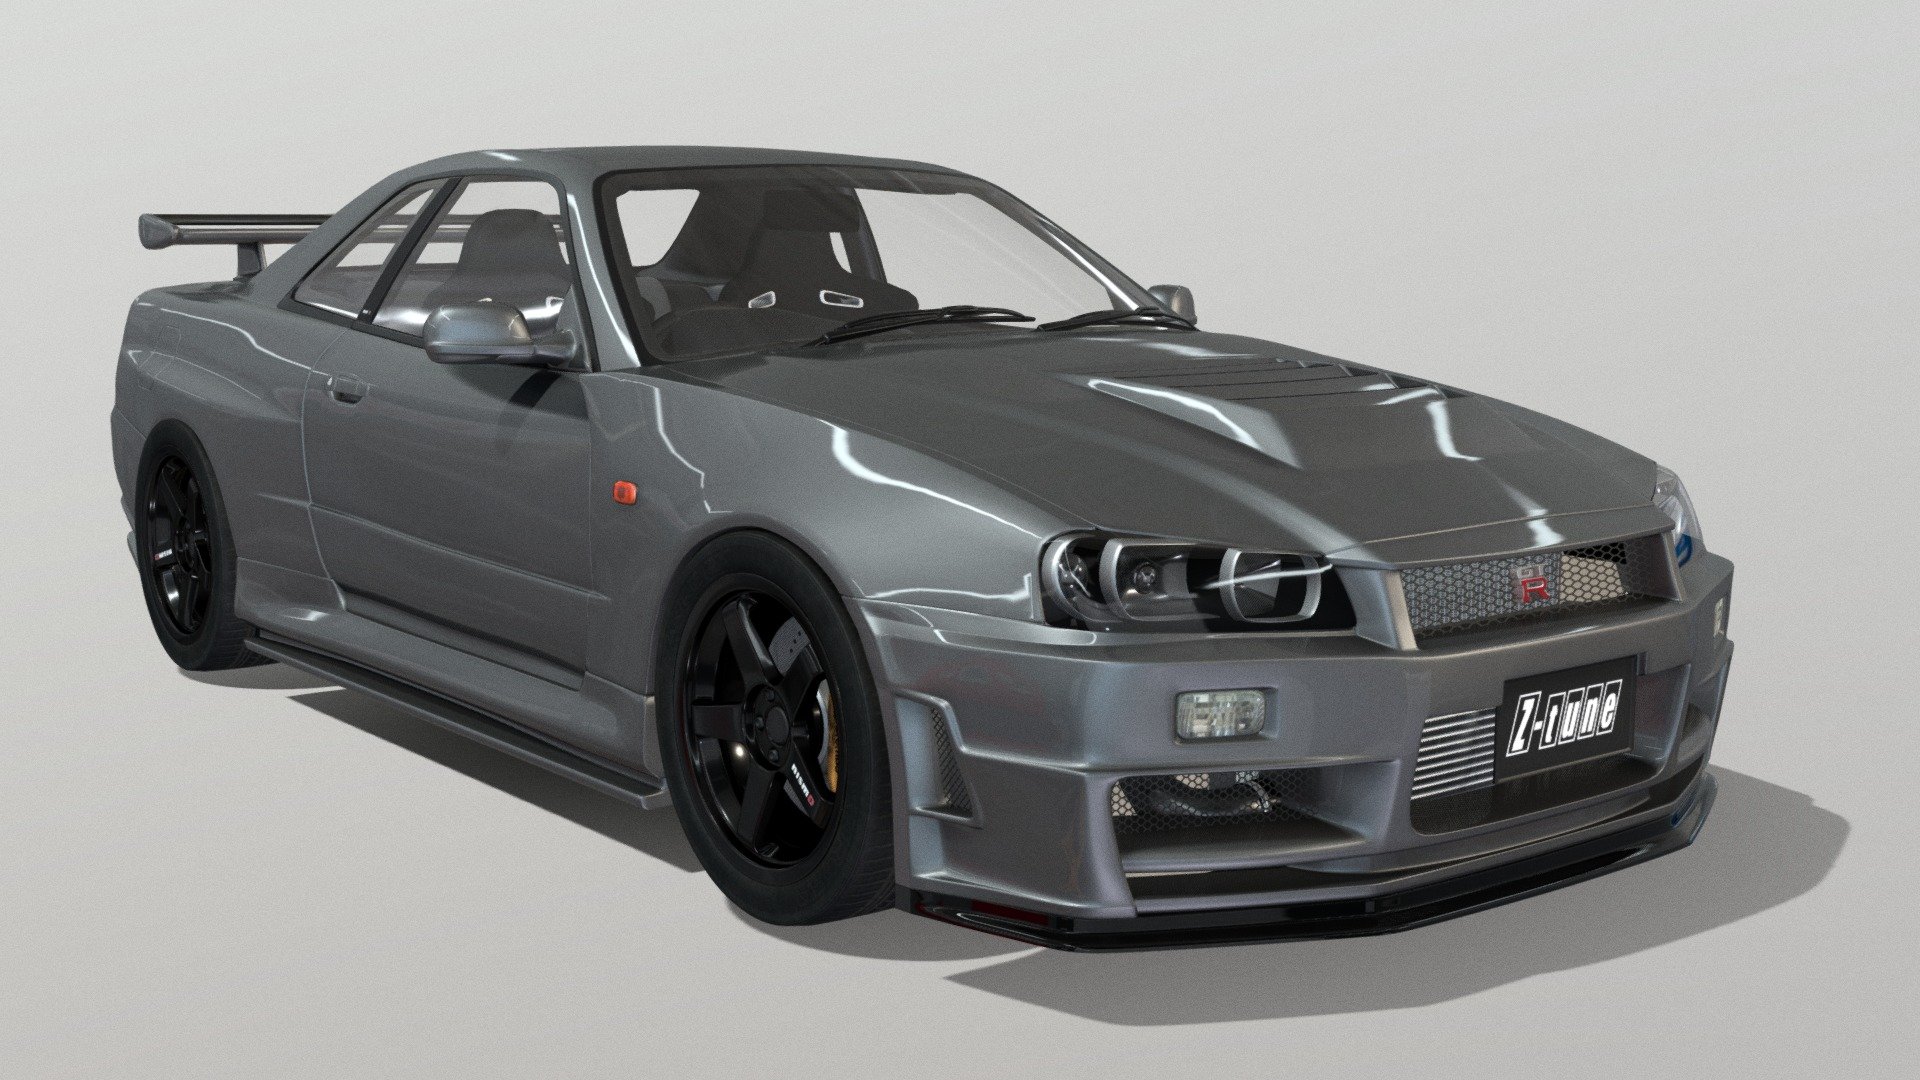 High quality Nissan Skyline R34 GT-R Nismo Z-Tune model.

If you want to buy this or any other model Contact me at discord Palikka___#2115 - Nissan Skyline R34 GT-R Nismo Z-Tune - 3D model by LTStudio (@Lenna.Tornberg) 3d model